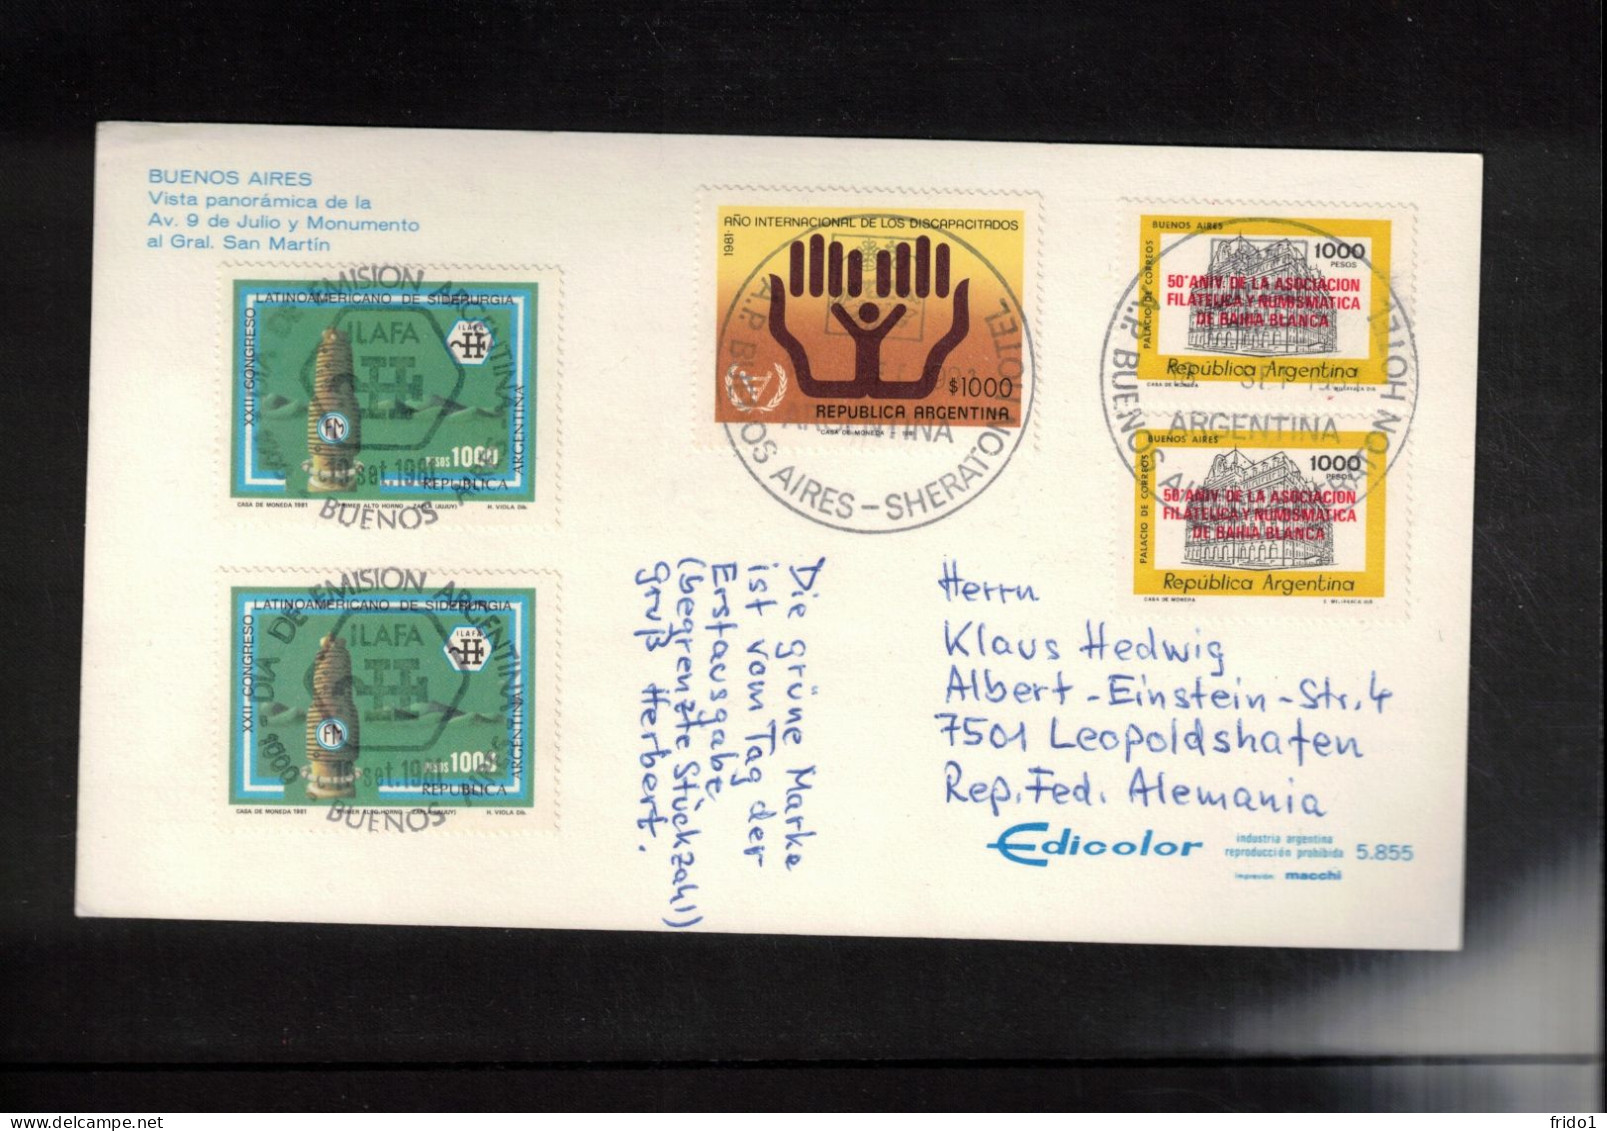 Argentina 1981 Interesting Postcard With HOTEL SHERATON BUENOS AIRES Postmark - Briefe U. Dokumente